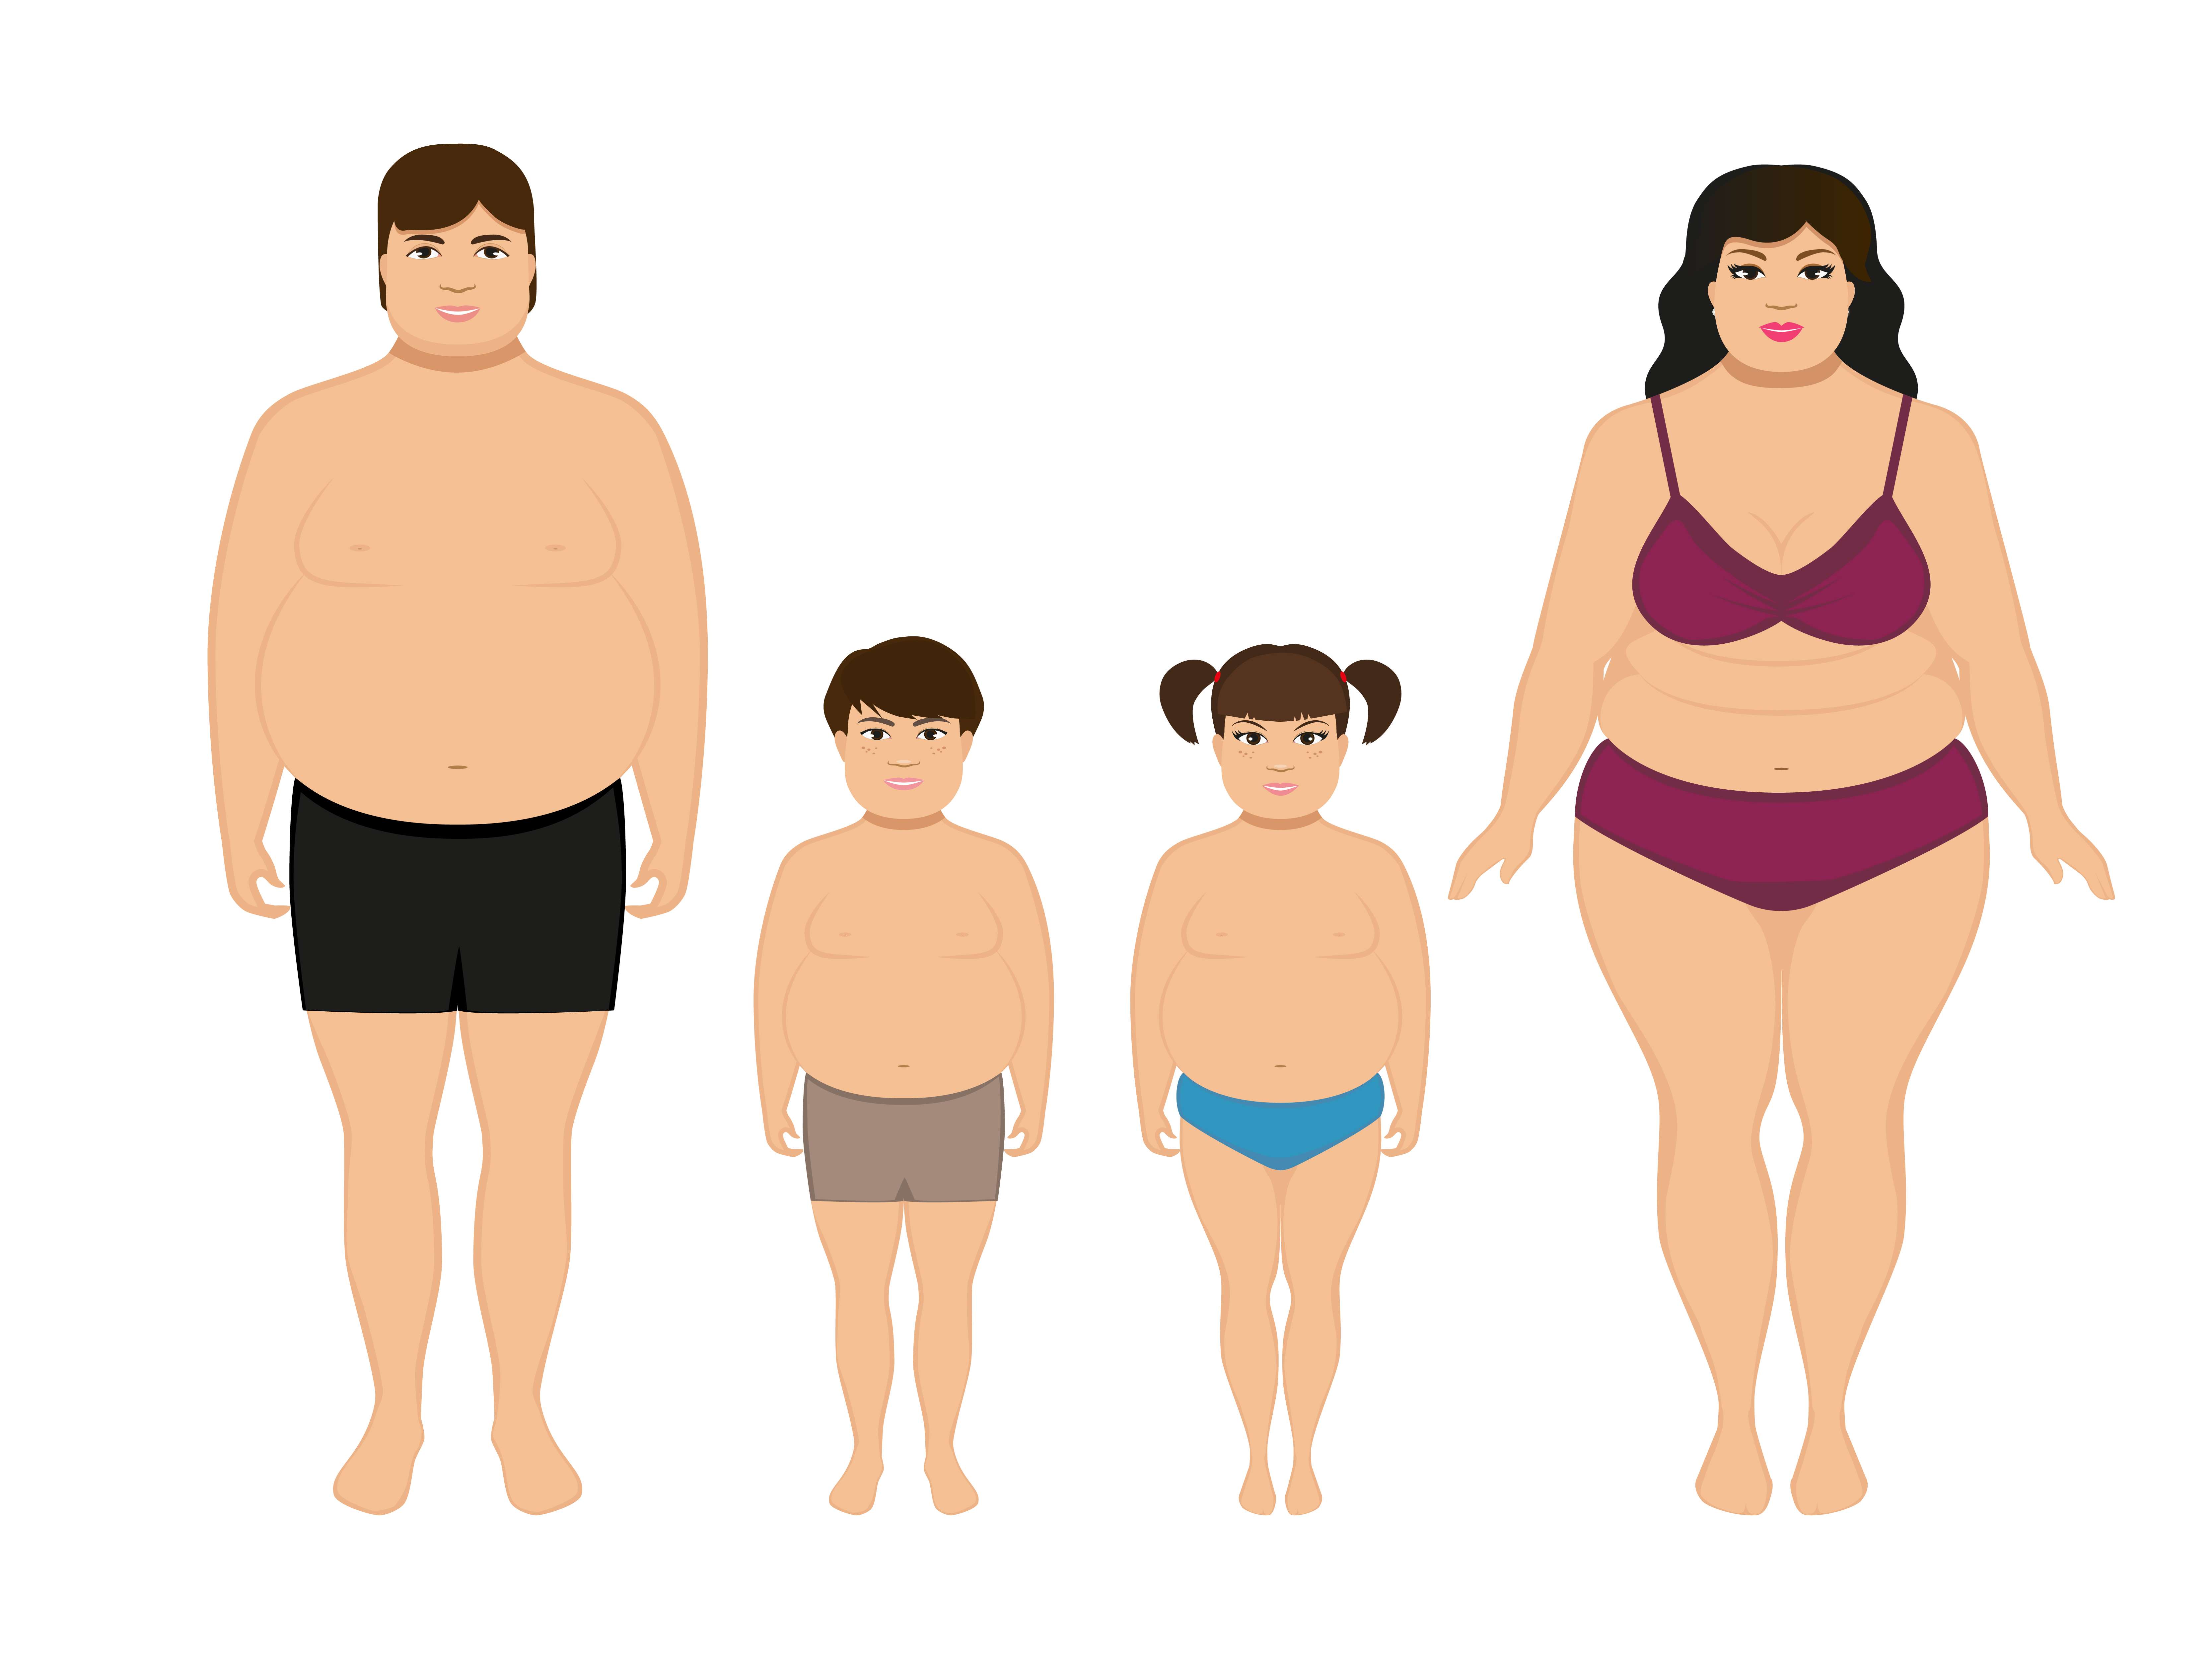 Parental obesity has been shown to have an adverse effect on child development.